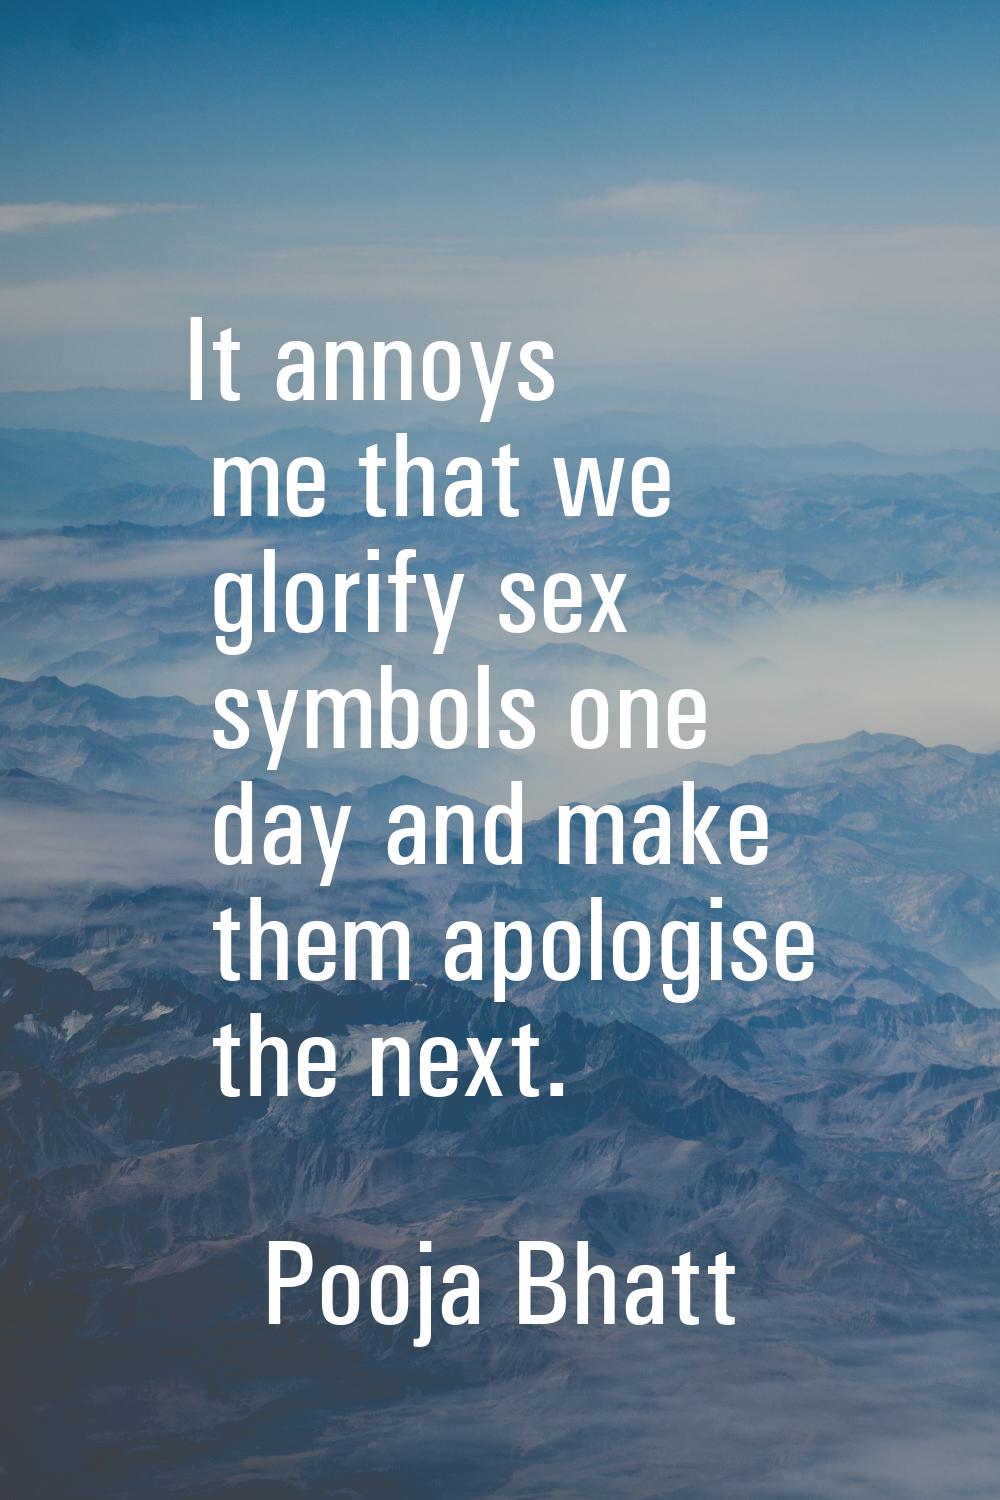 It annoys me that we glorify sex symbols one day and make them apologise the next.